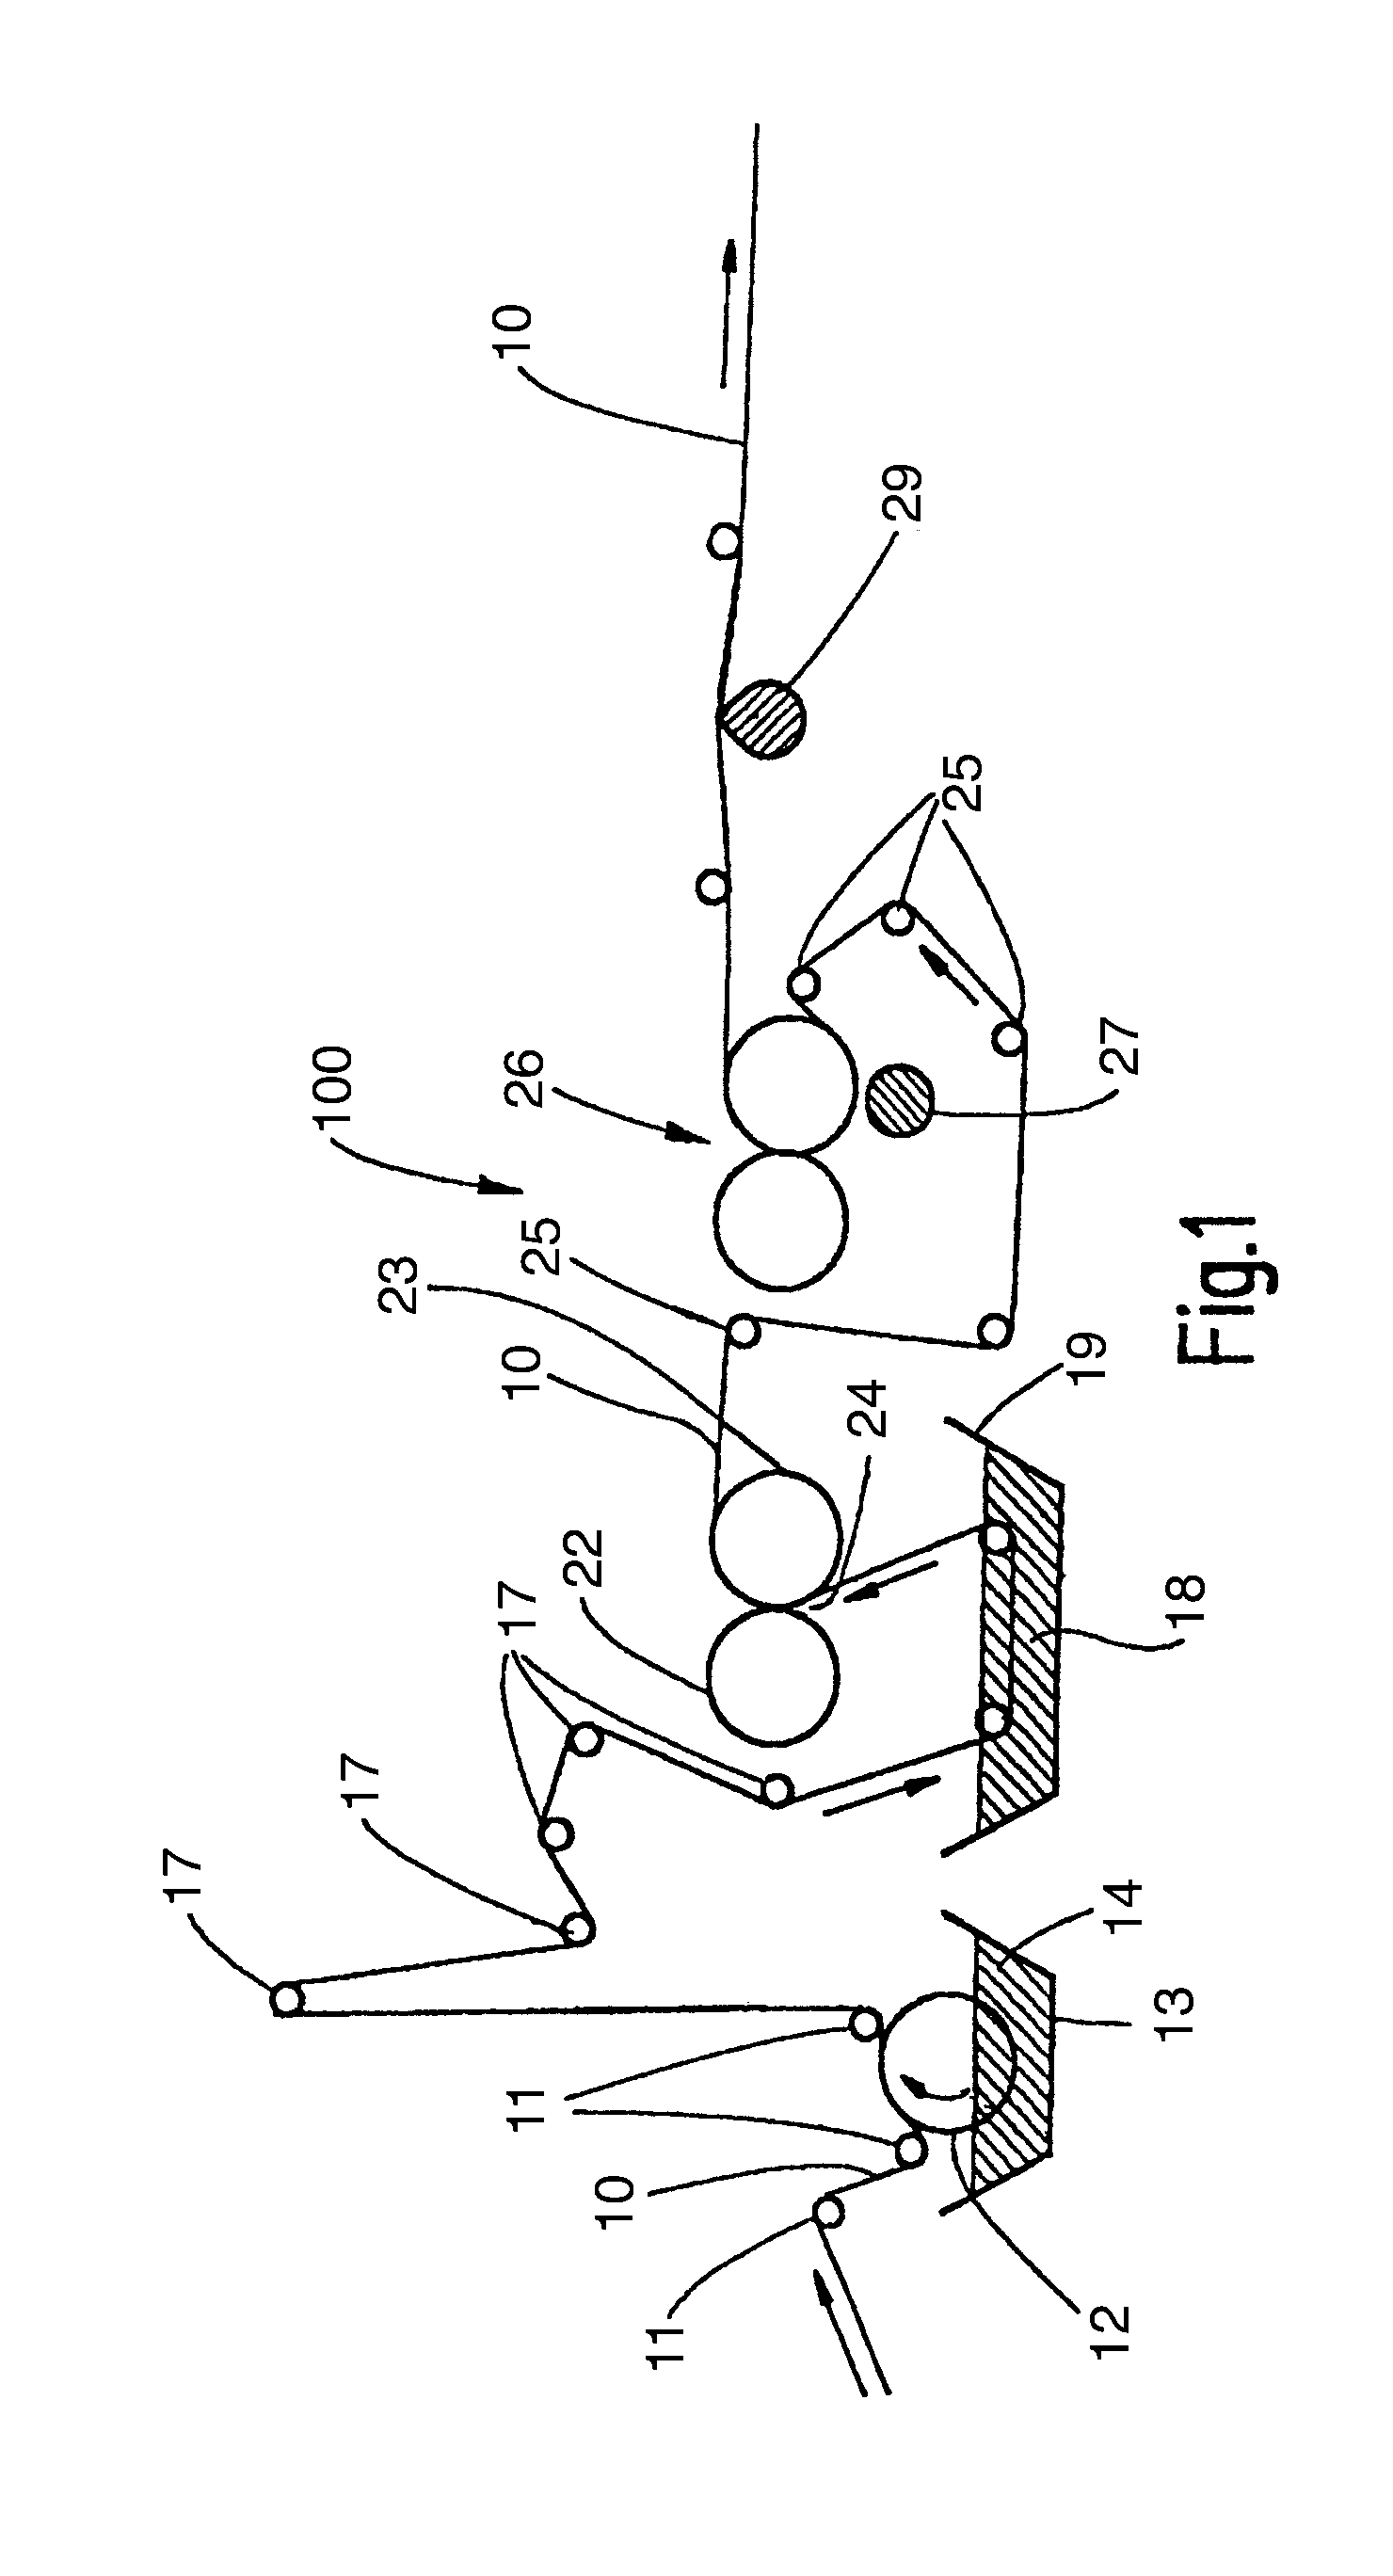 Method for the production of a chafe resistant overlay